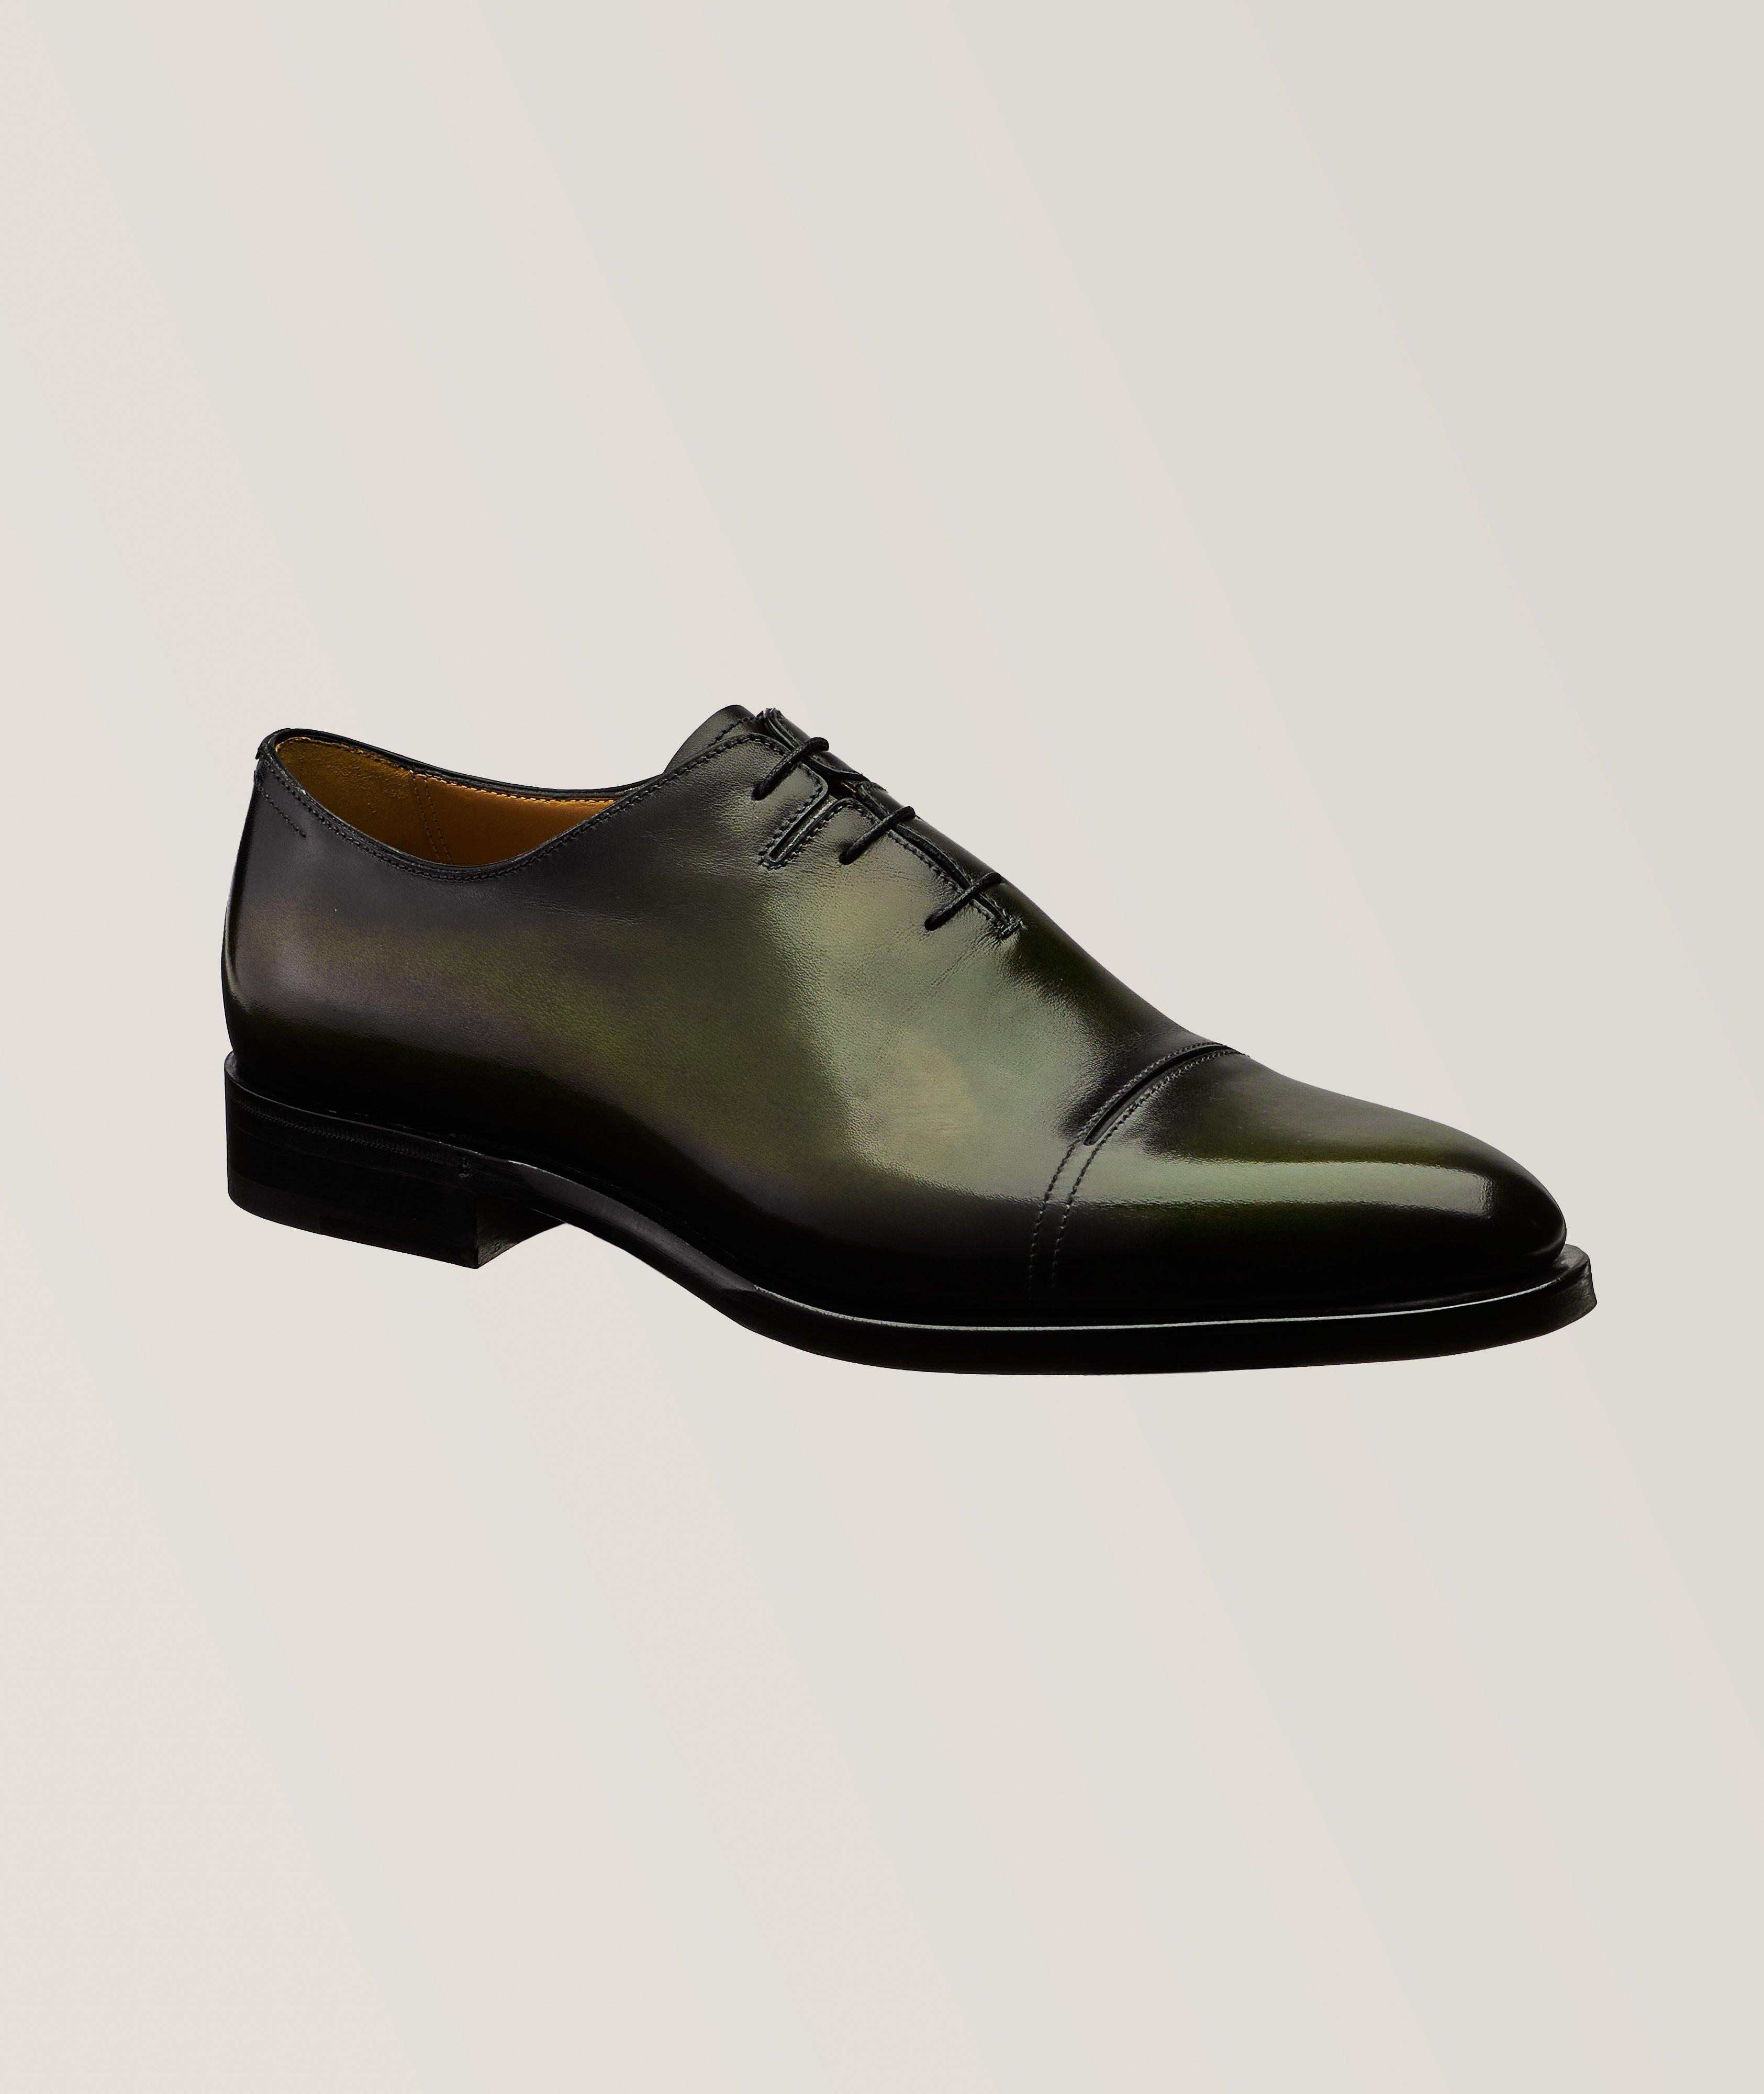 Equilibre Leather Oxfords image 0